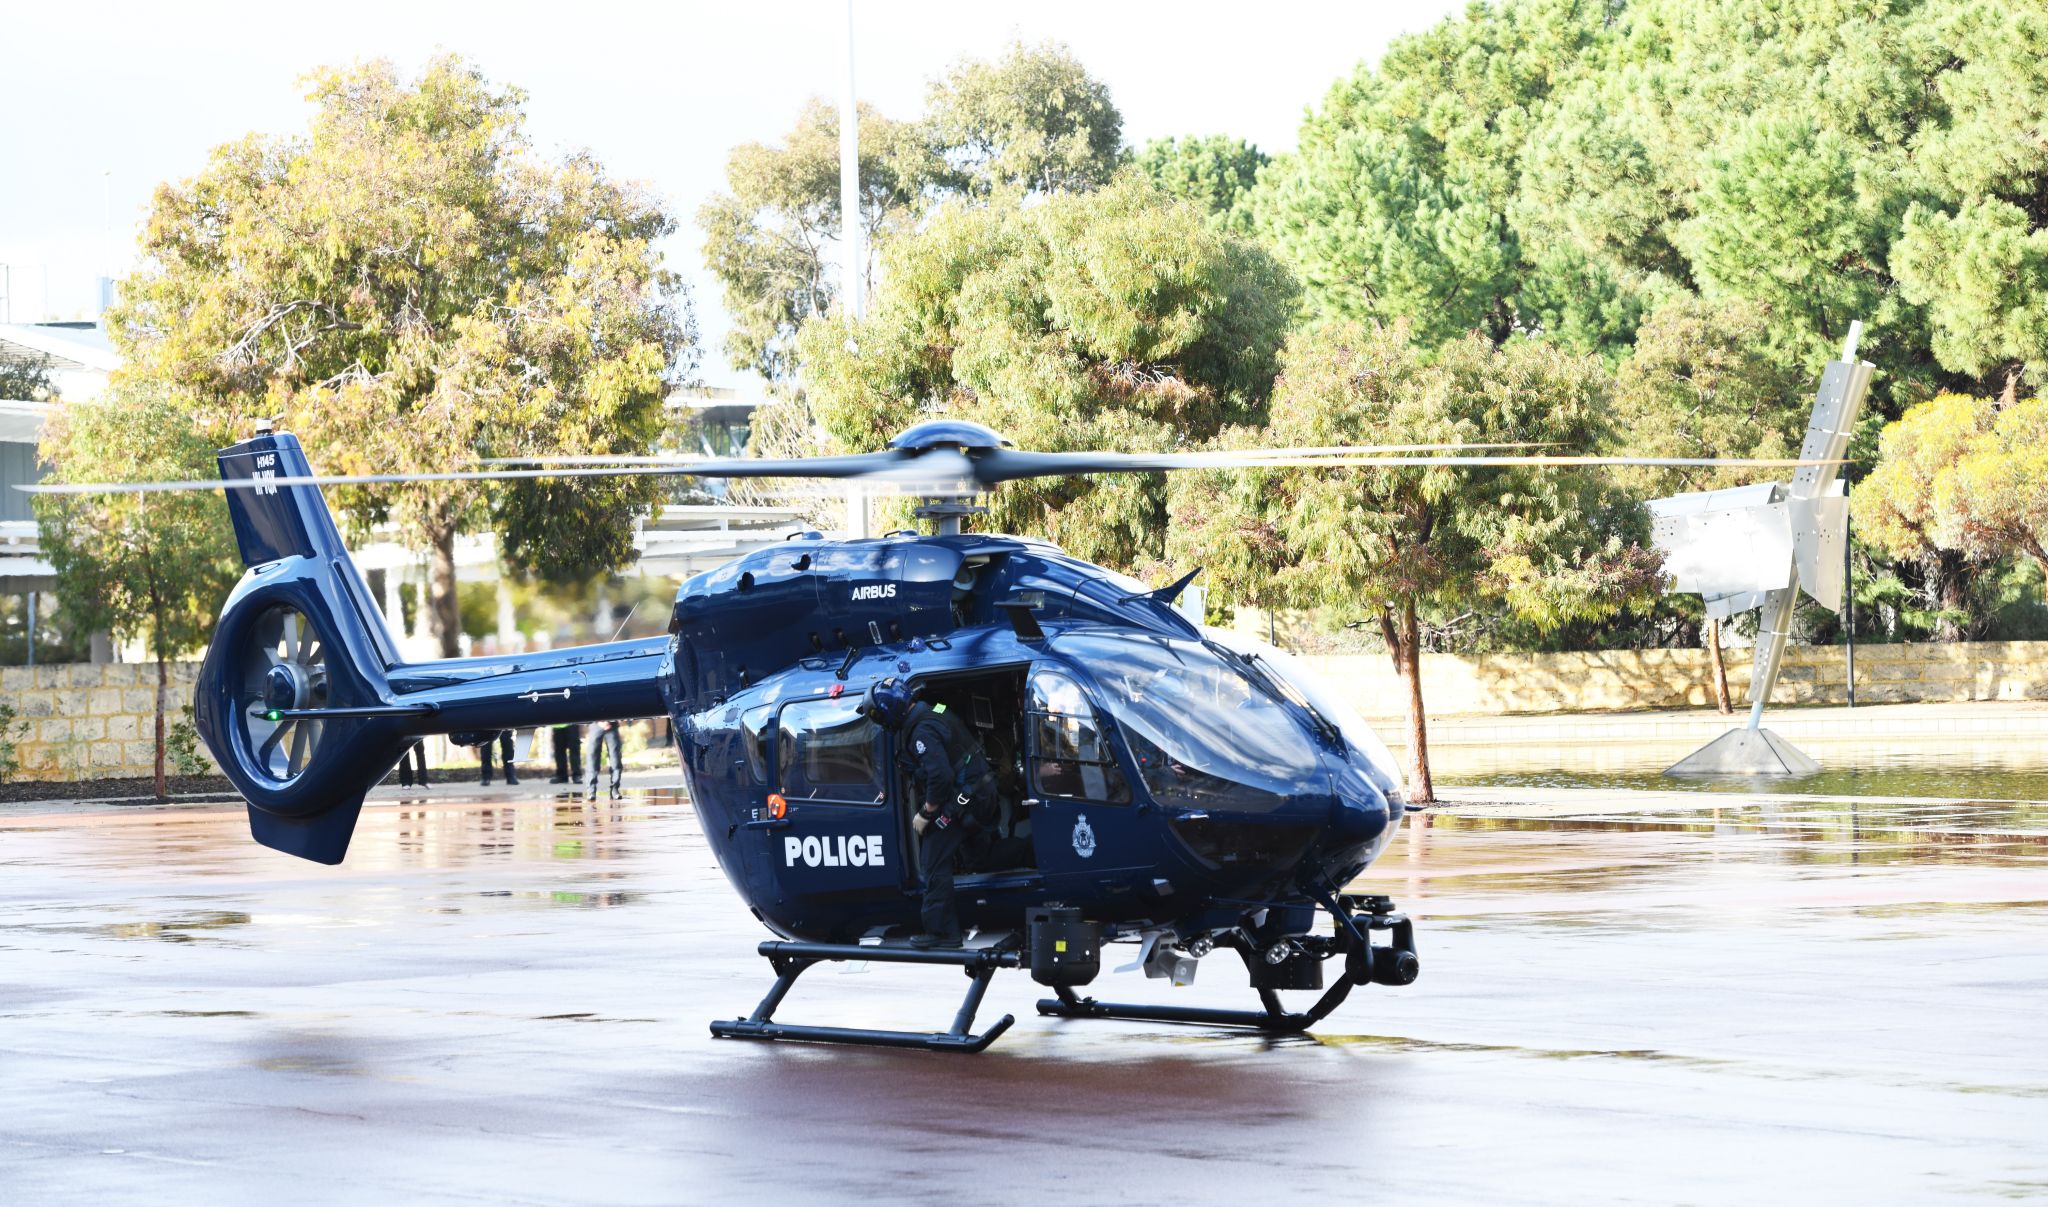 WA Police scores two firsts with H145 D3 delivery